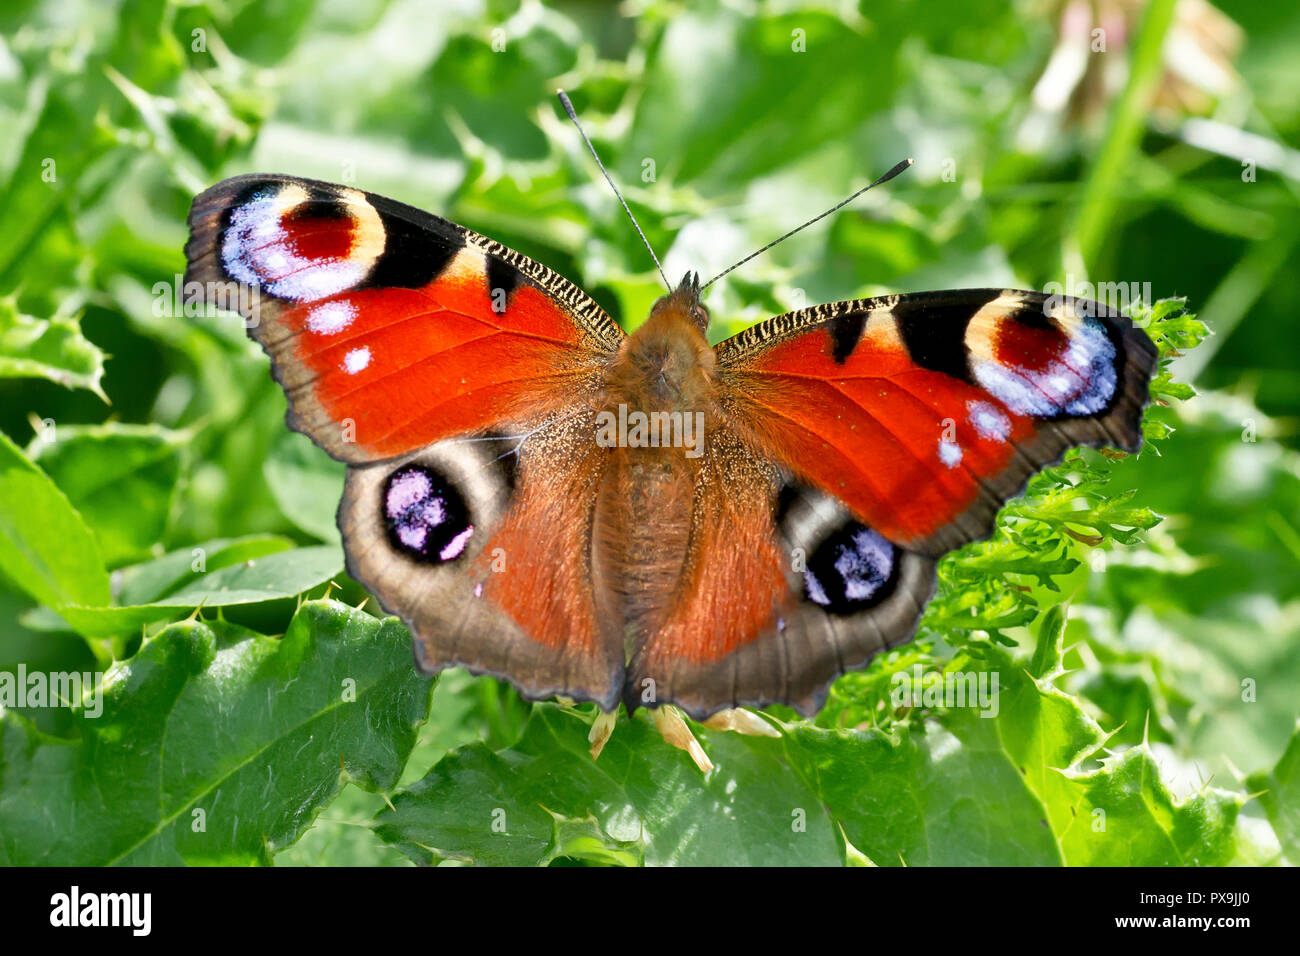 Peacock Butterfly (aglais io), also known as the European Peacock, at rest on some thistle leaves. Stock Photo